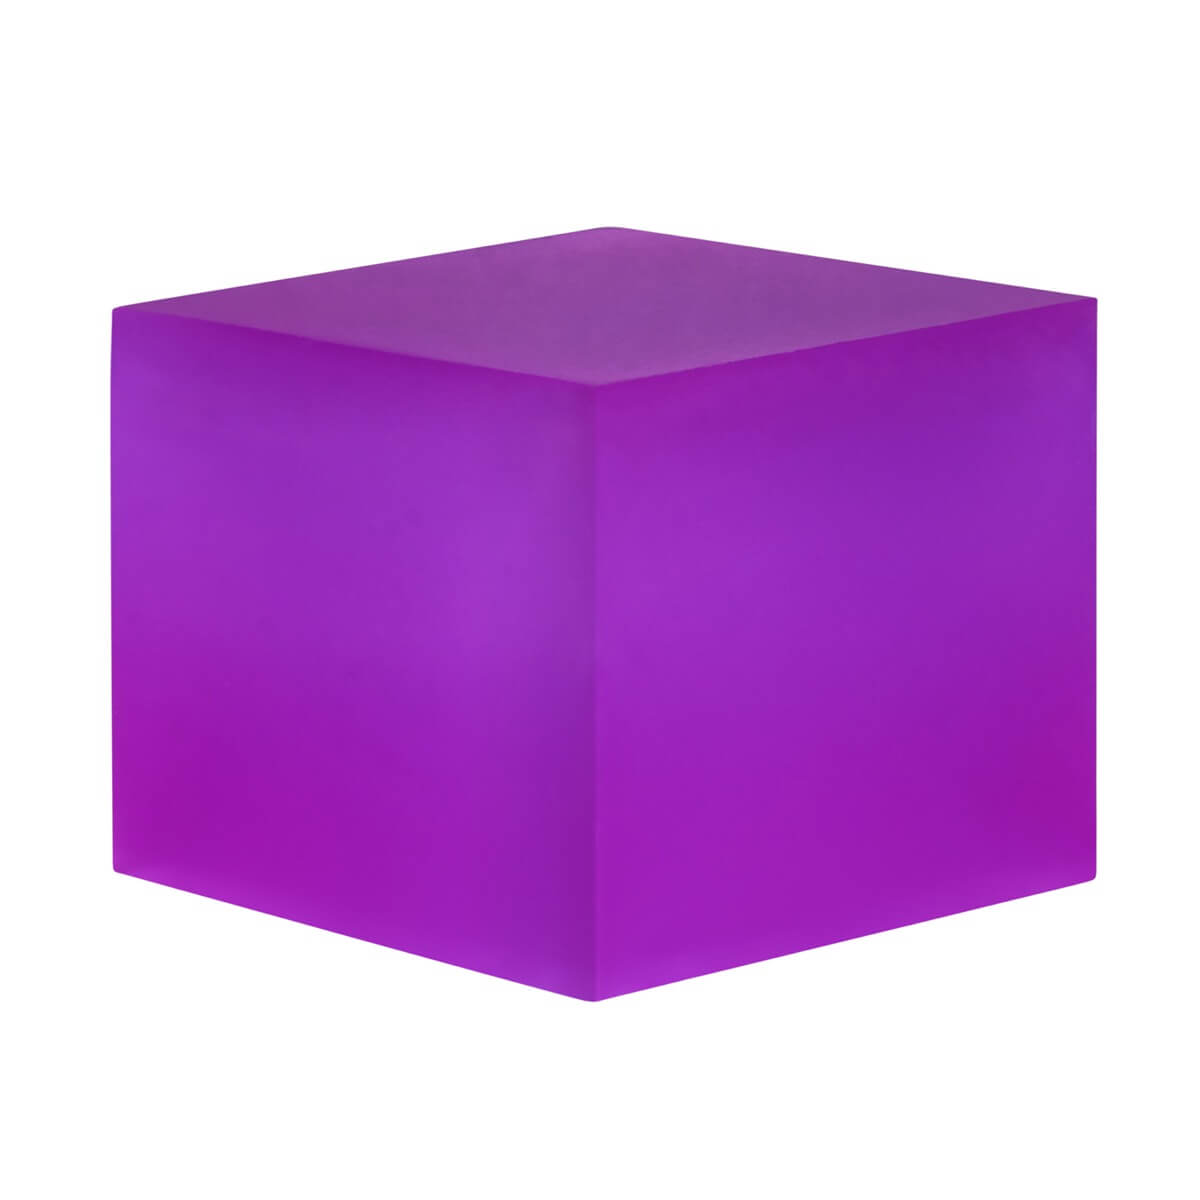 A resin cube made with the Neon Purple Mica Powder Pigment by Pigmently.